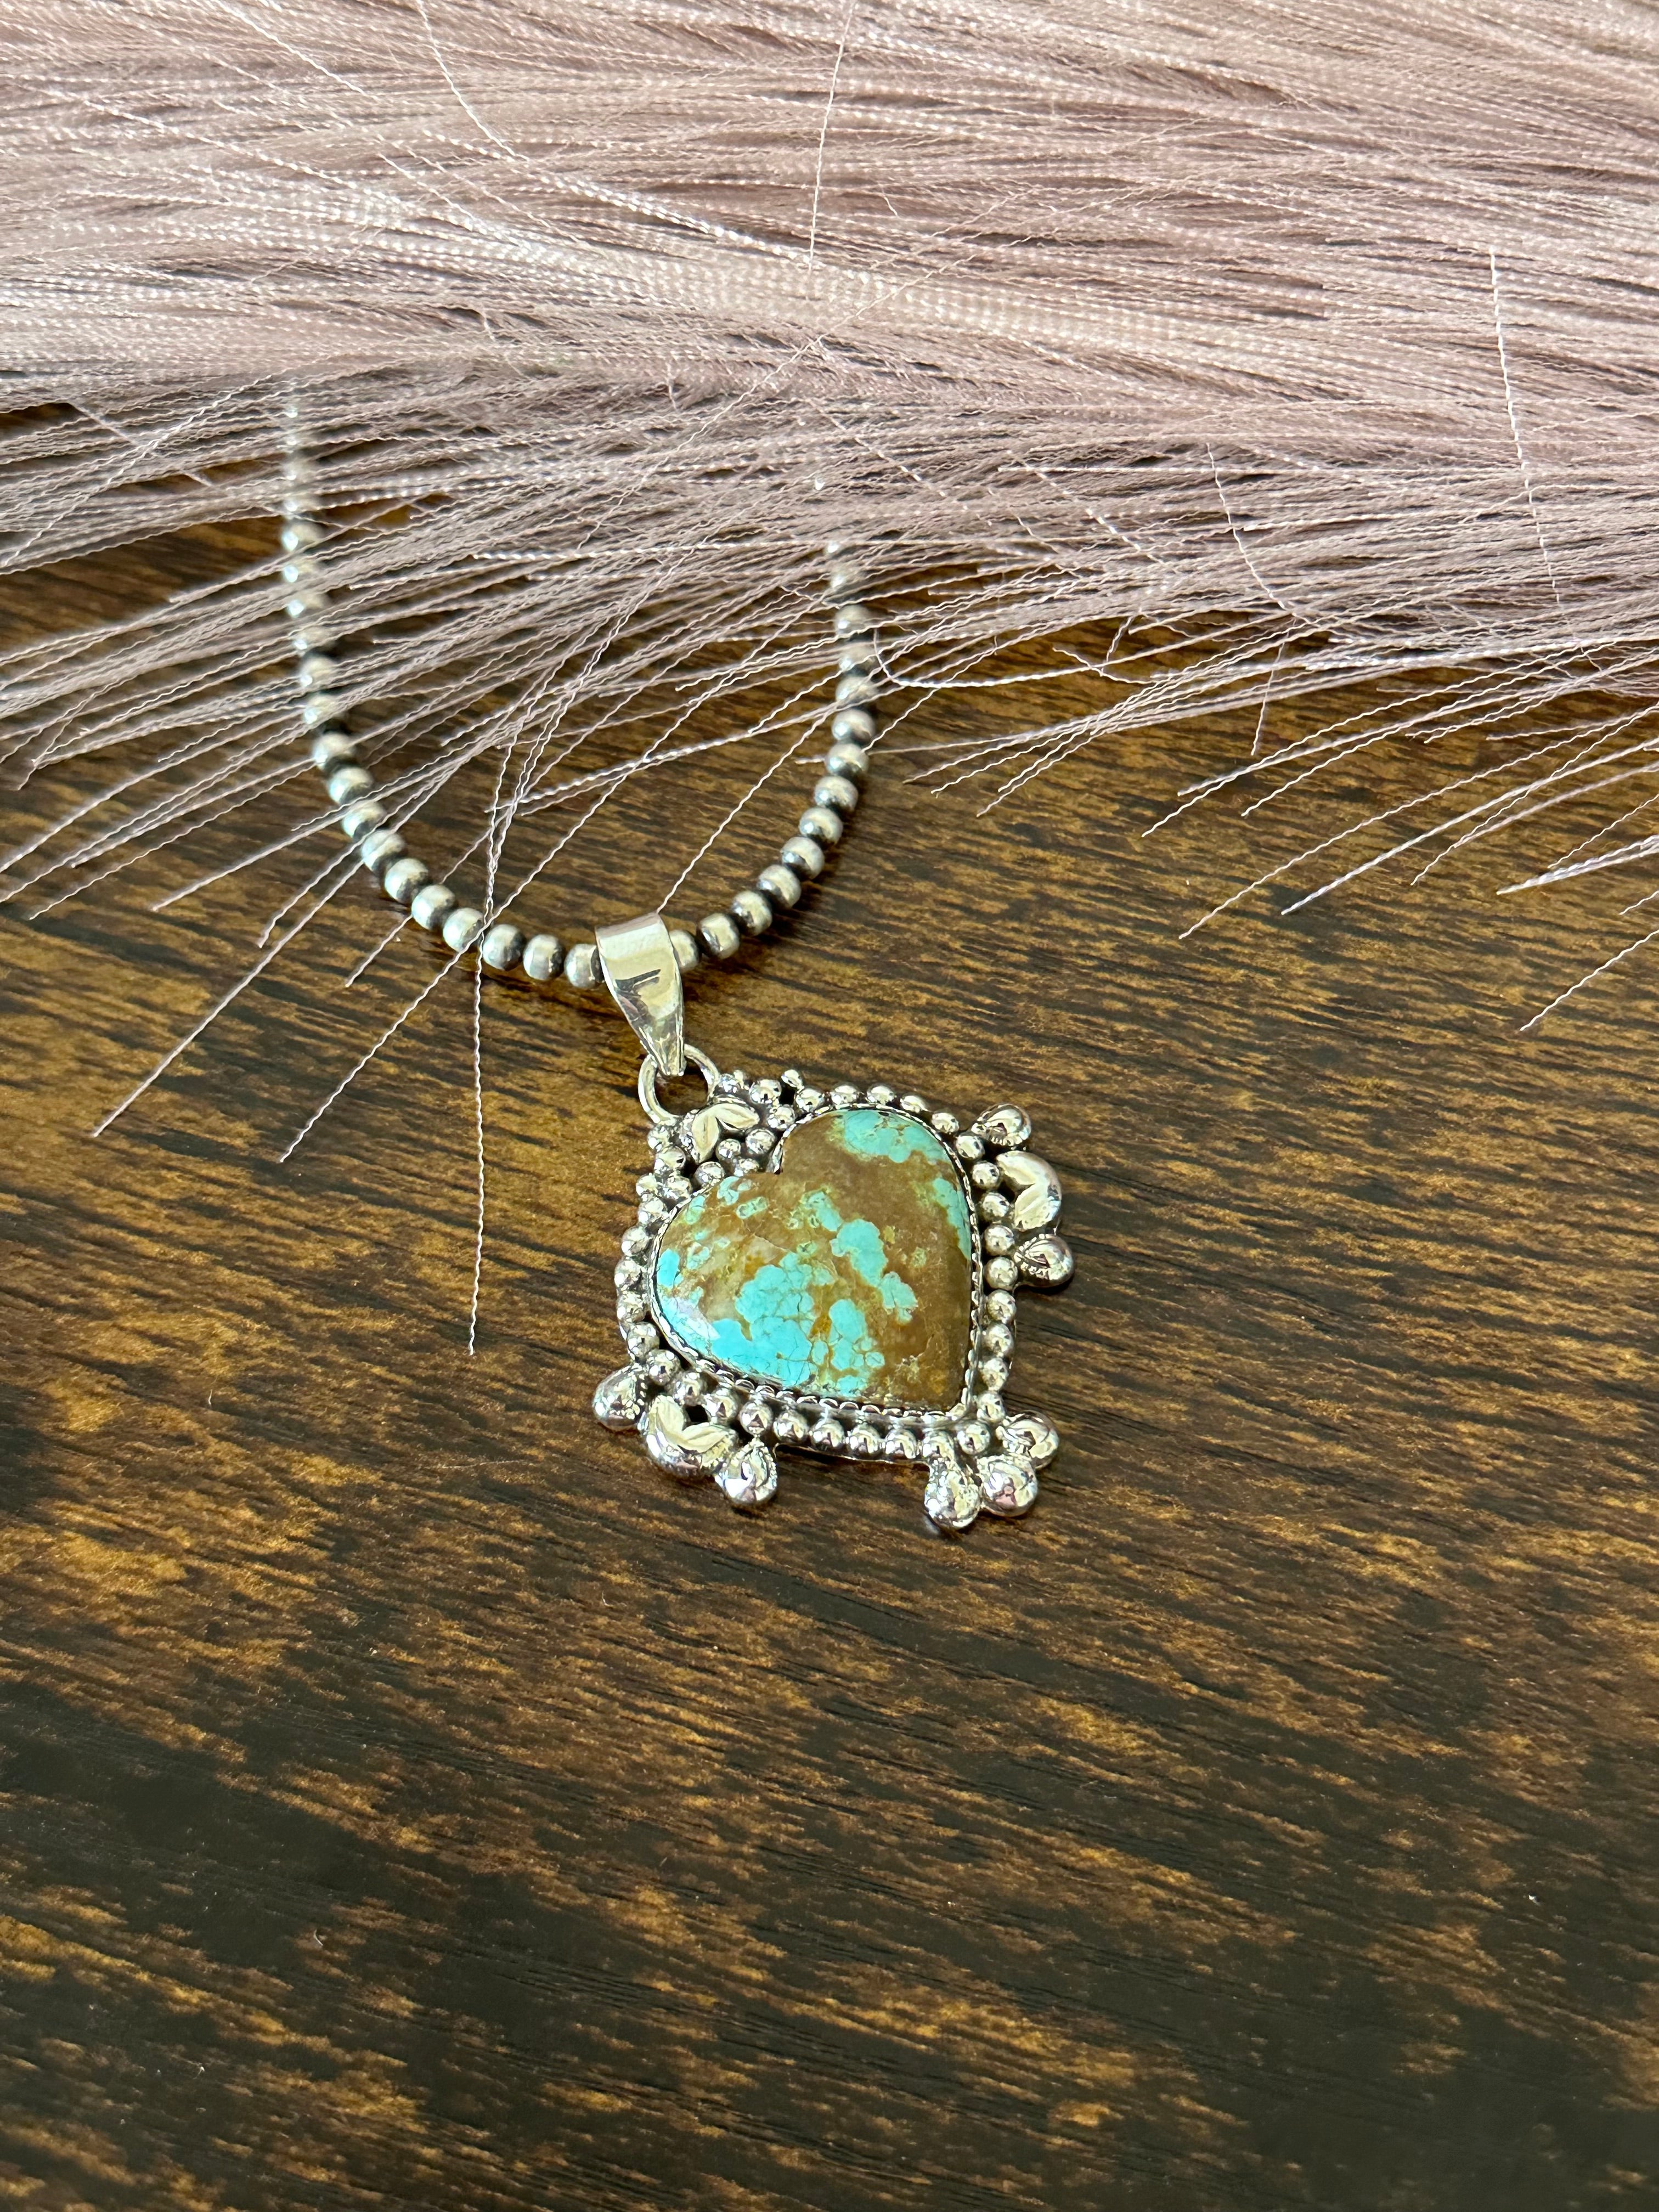 Southwest Handmade Number 8 Turquoise & Sterling Silver Heart Pendant